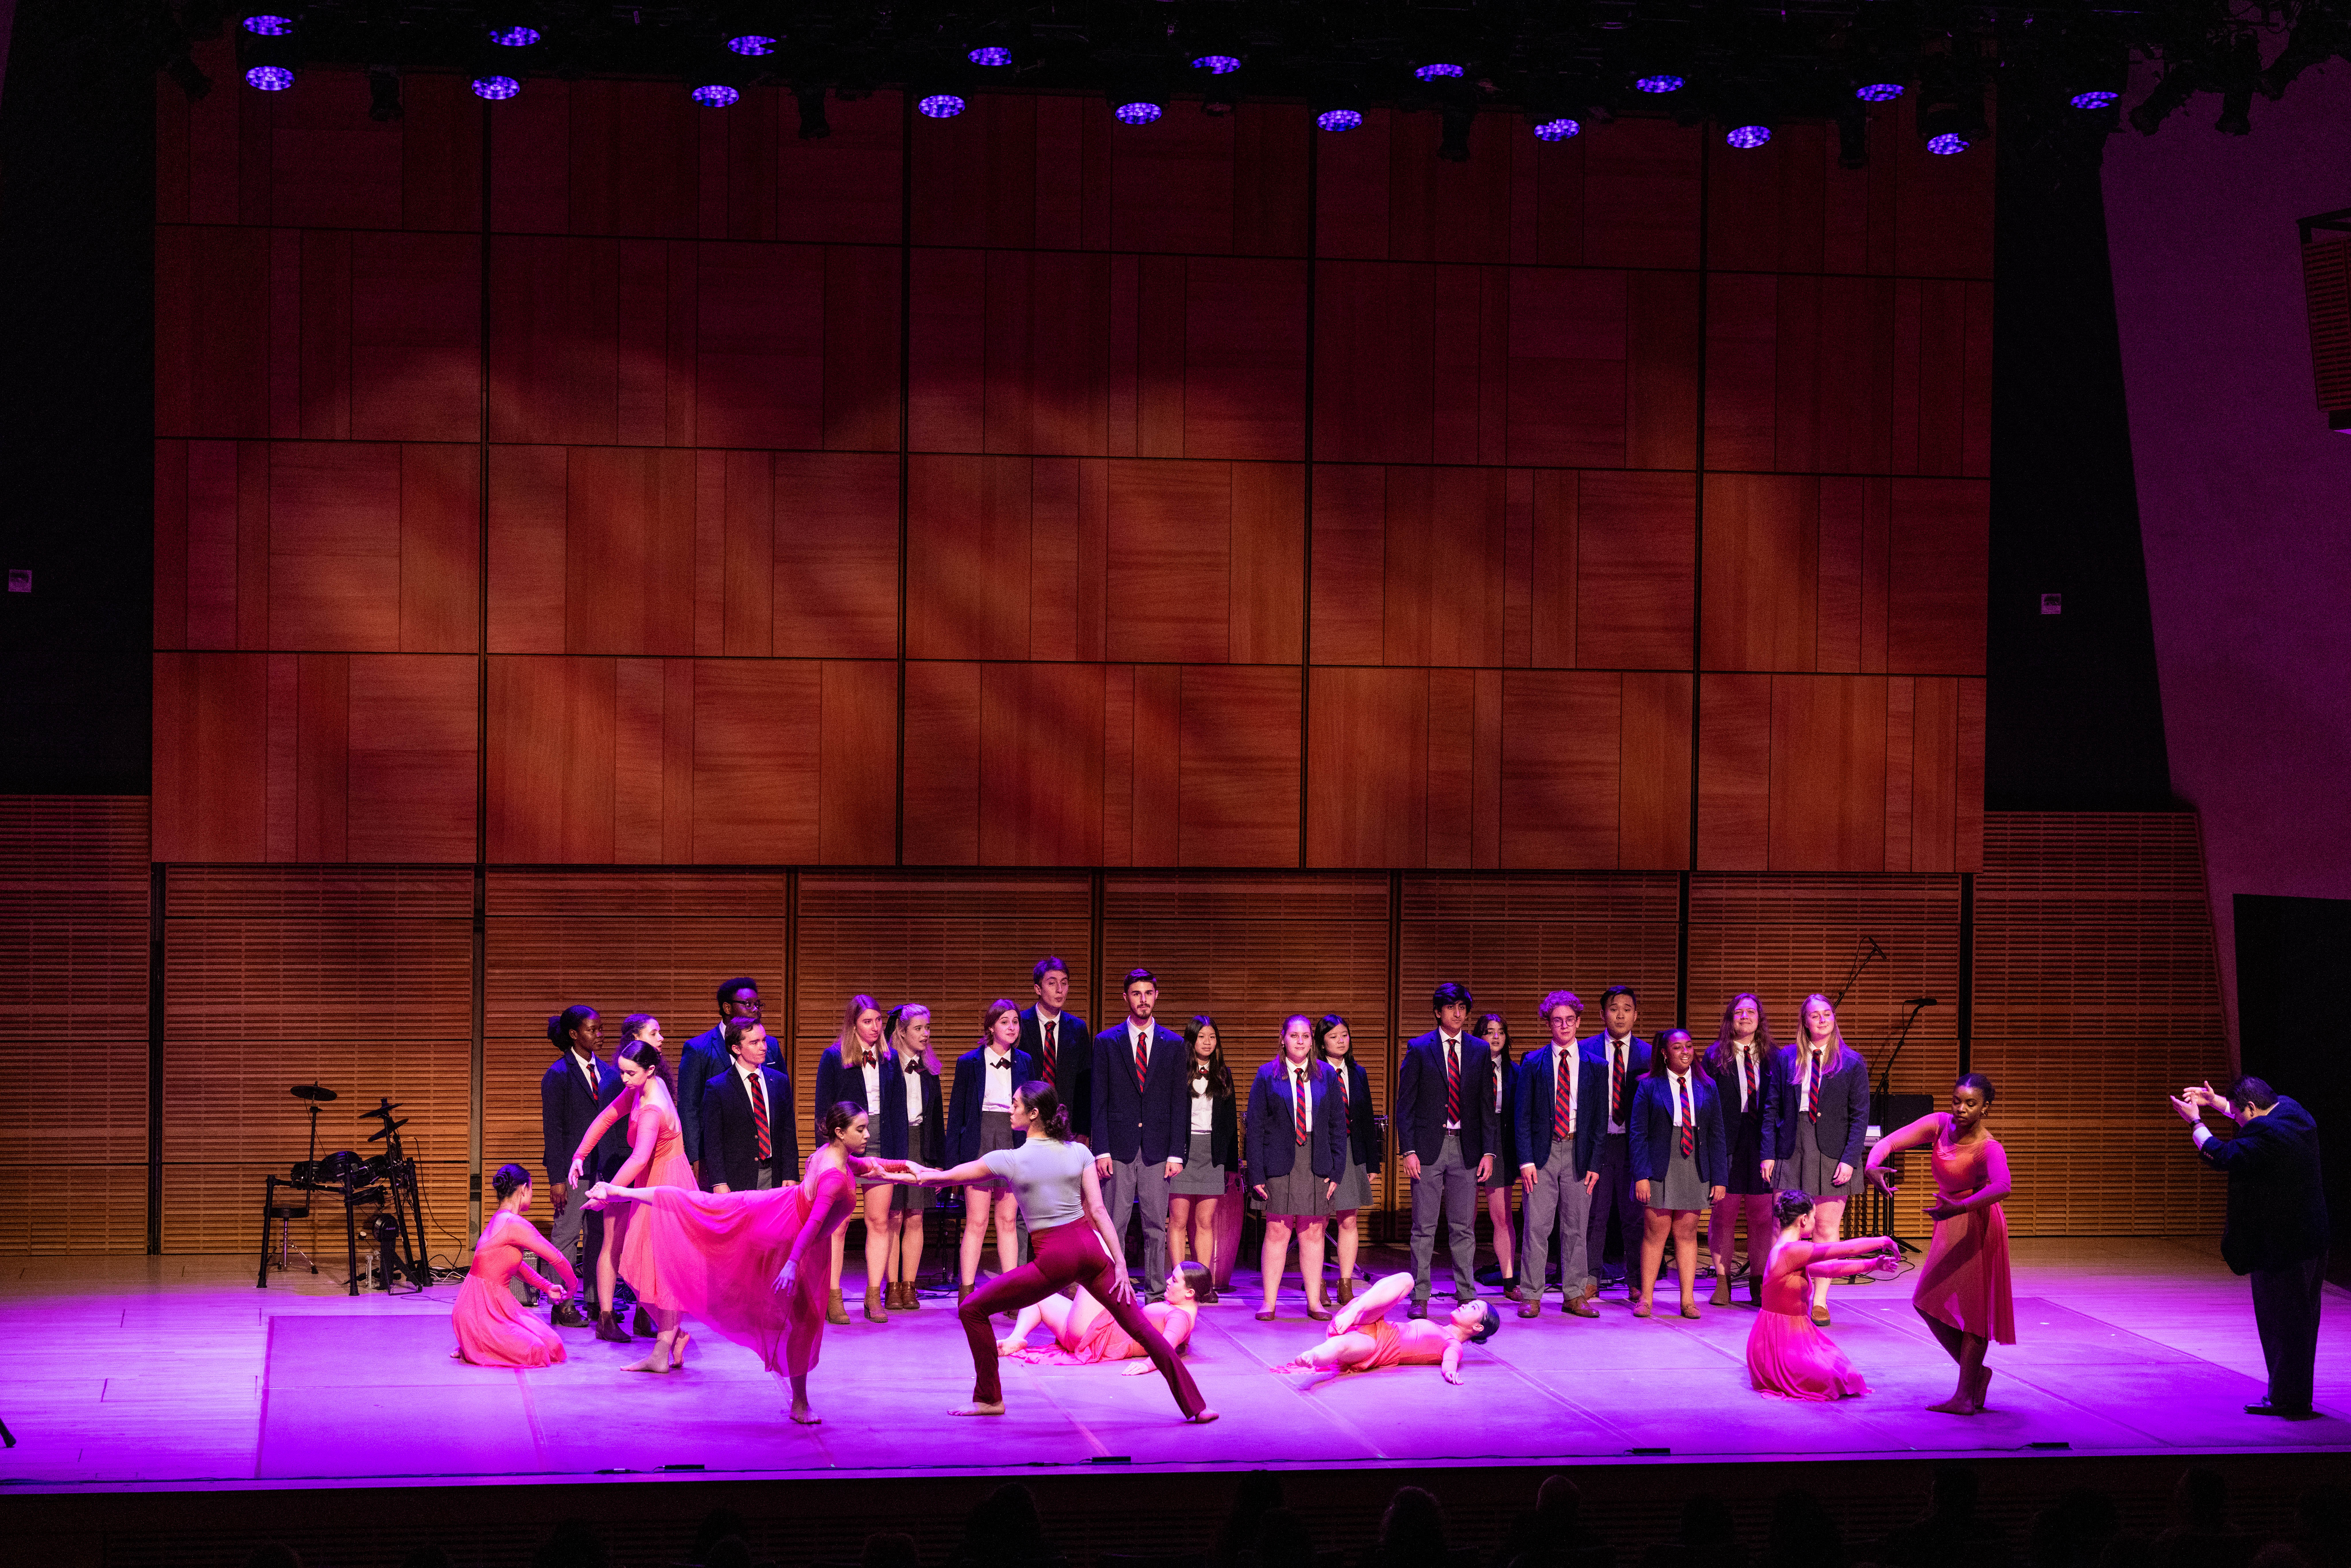 Penn Glee Club and Penn Dance Company performing on stage